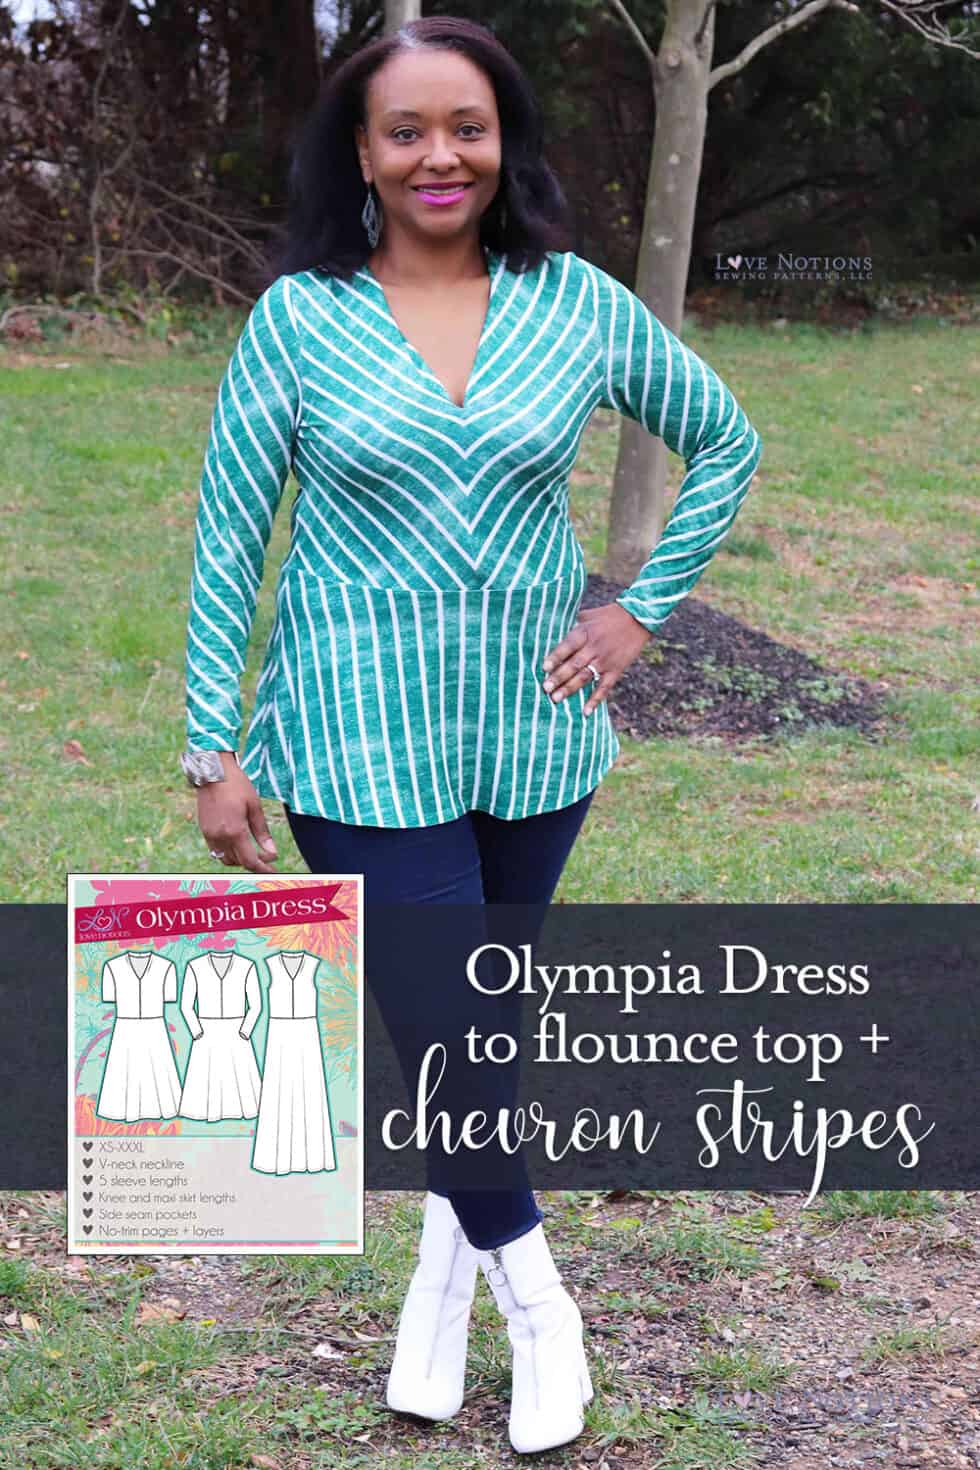 Olympia Flounce Top + Chevron Bodice - Love Notions Sewing Patterns